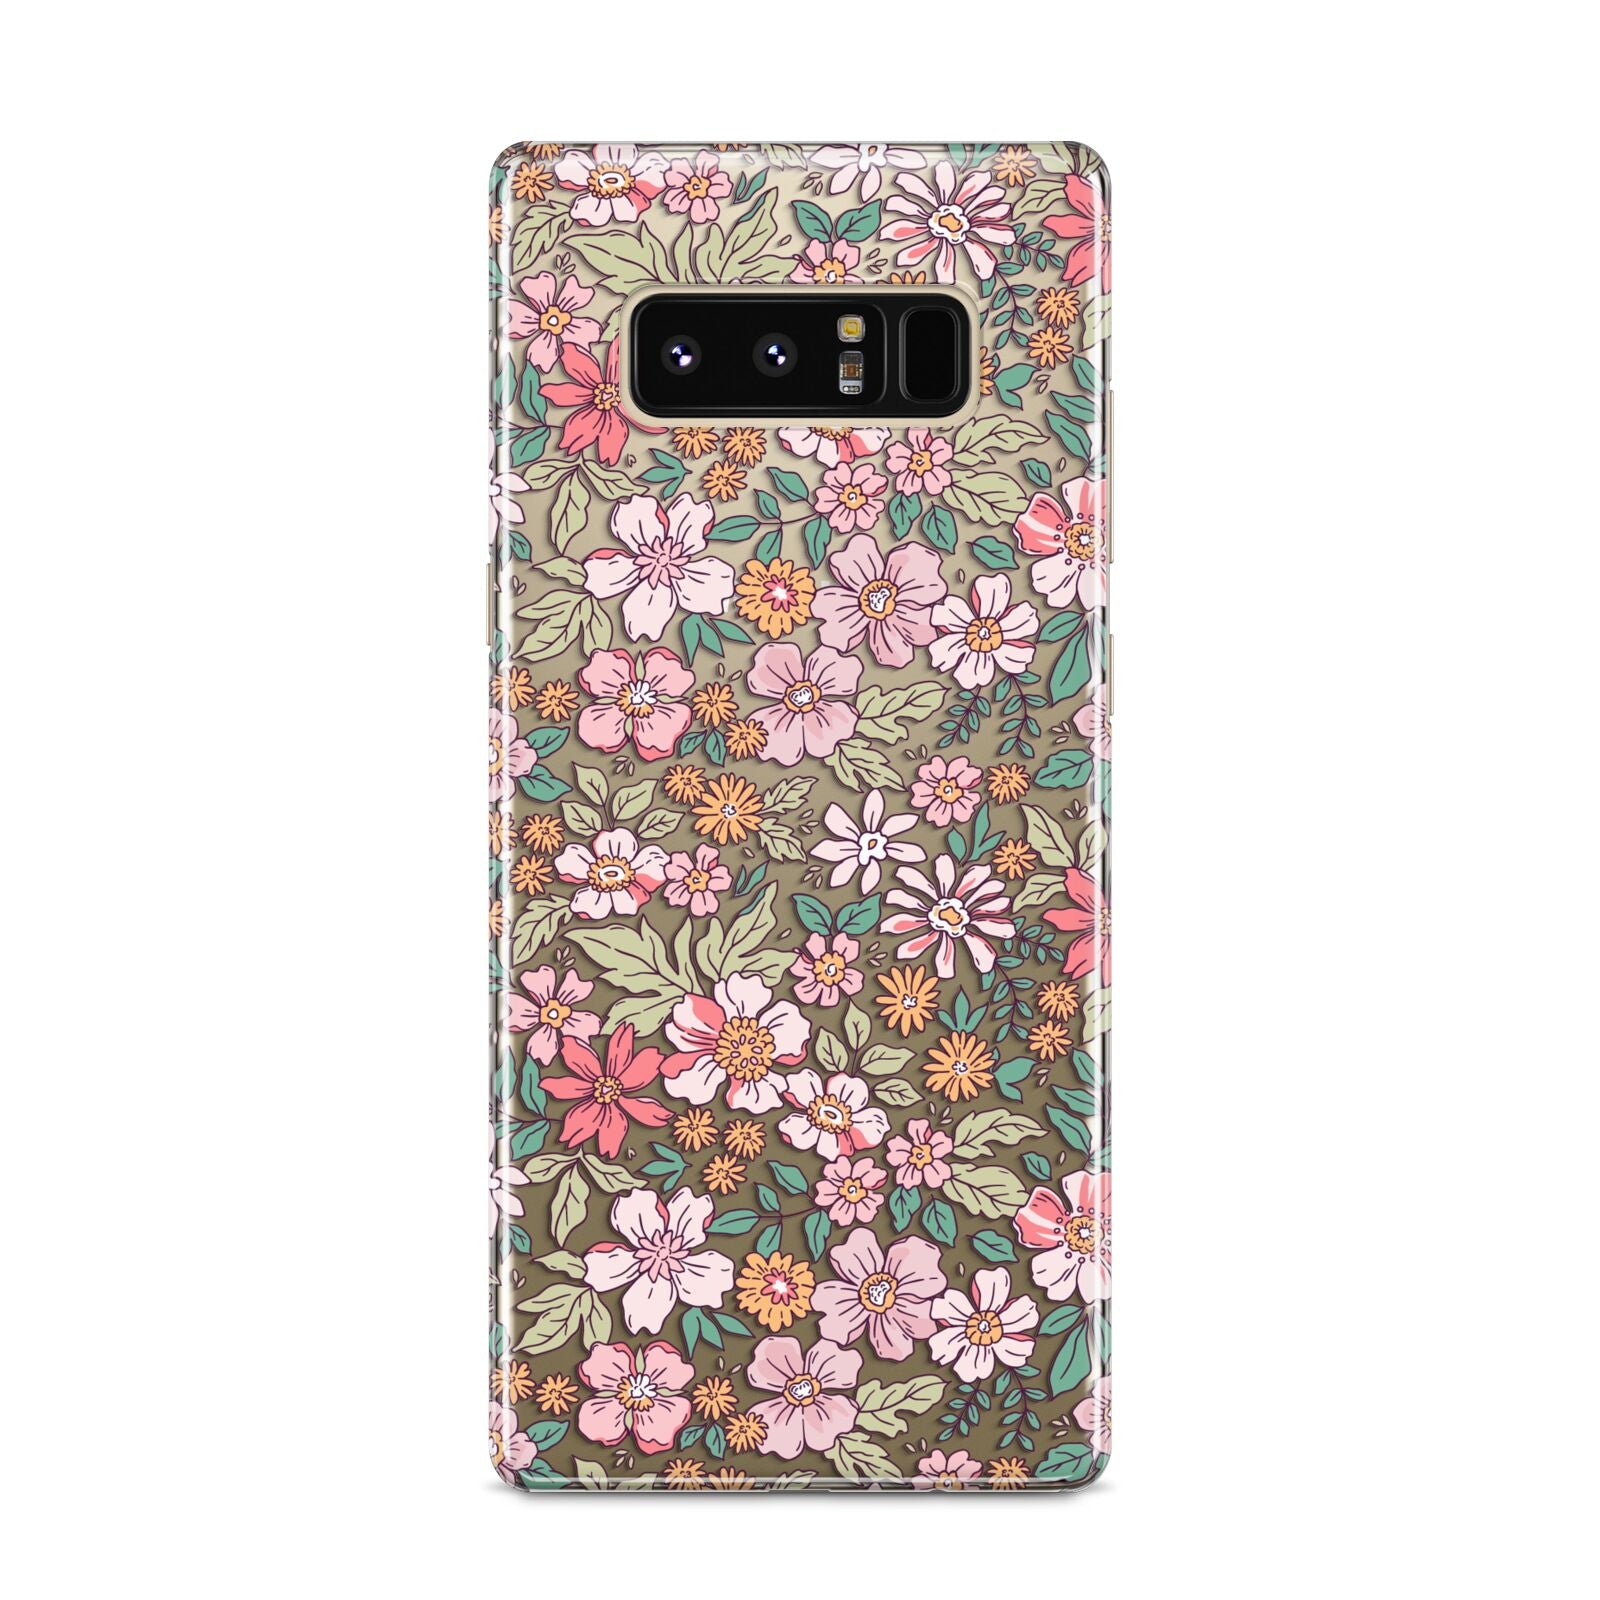 Small Floral Pattern Samsung Galaxy S8 Case